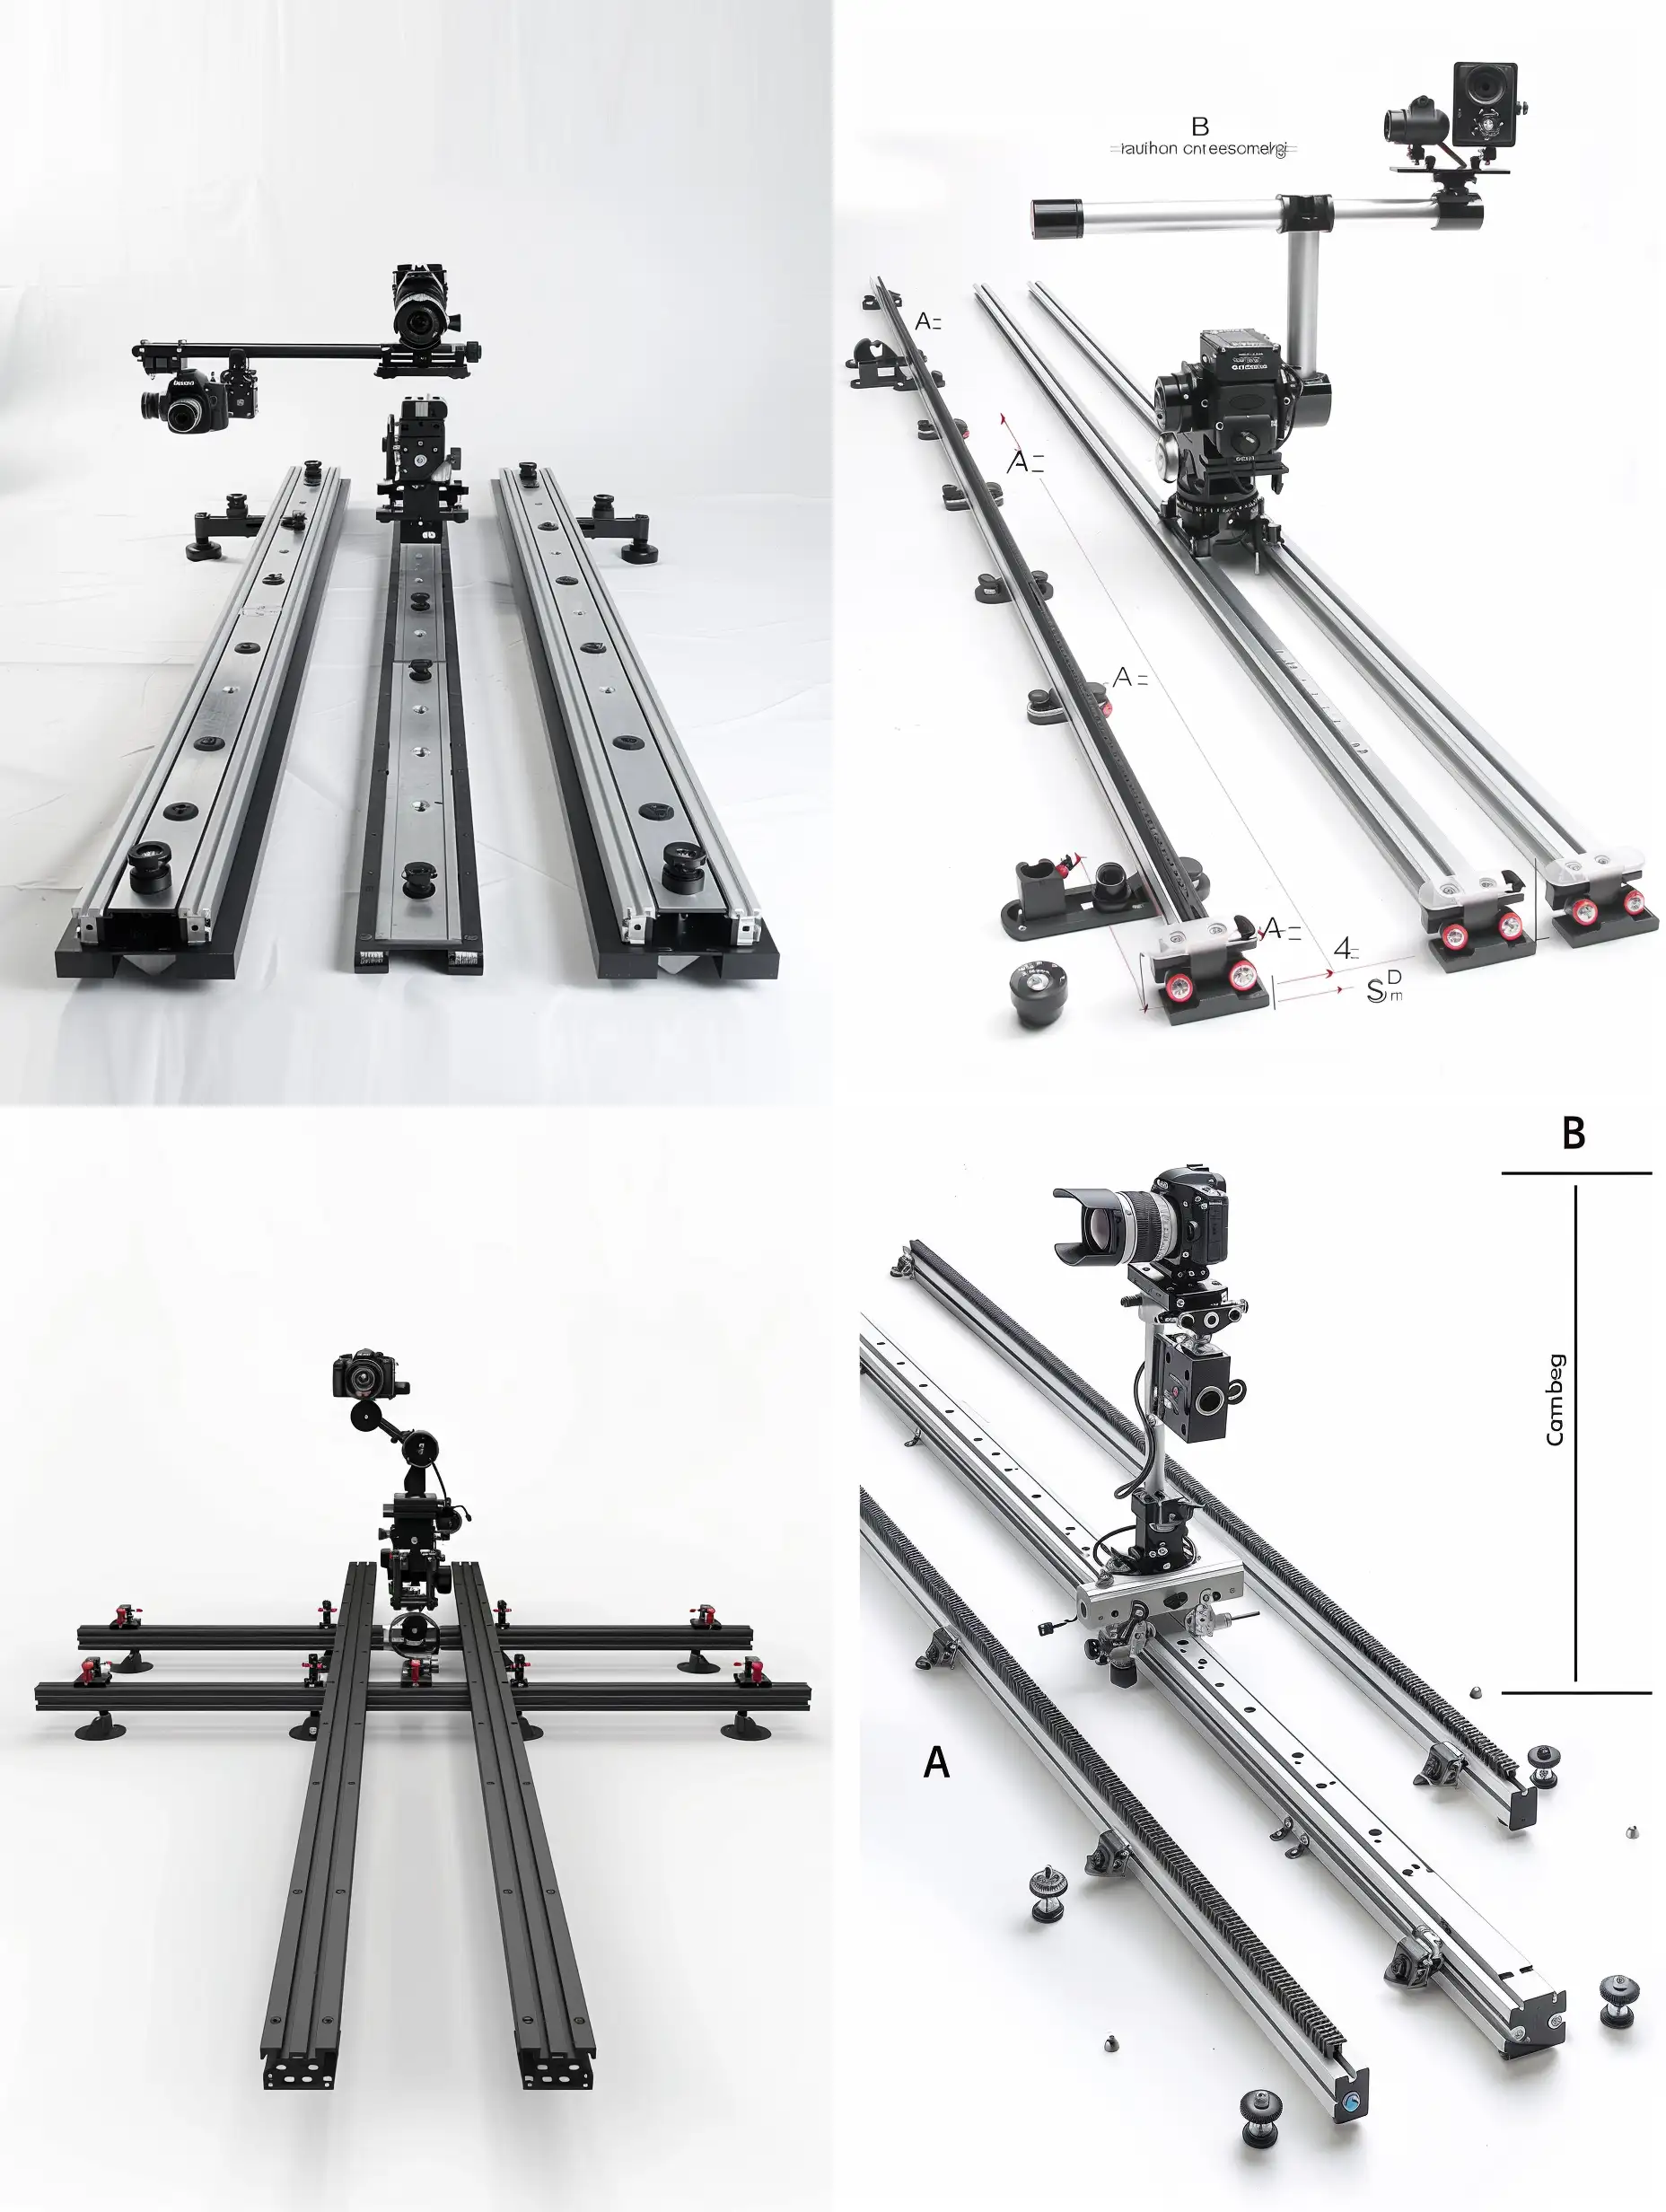 FourAxis-Mechanical-Arm-Sliding-on-Guide-Rails-with-Camera